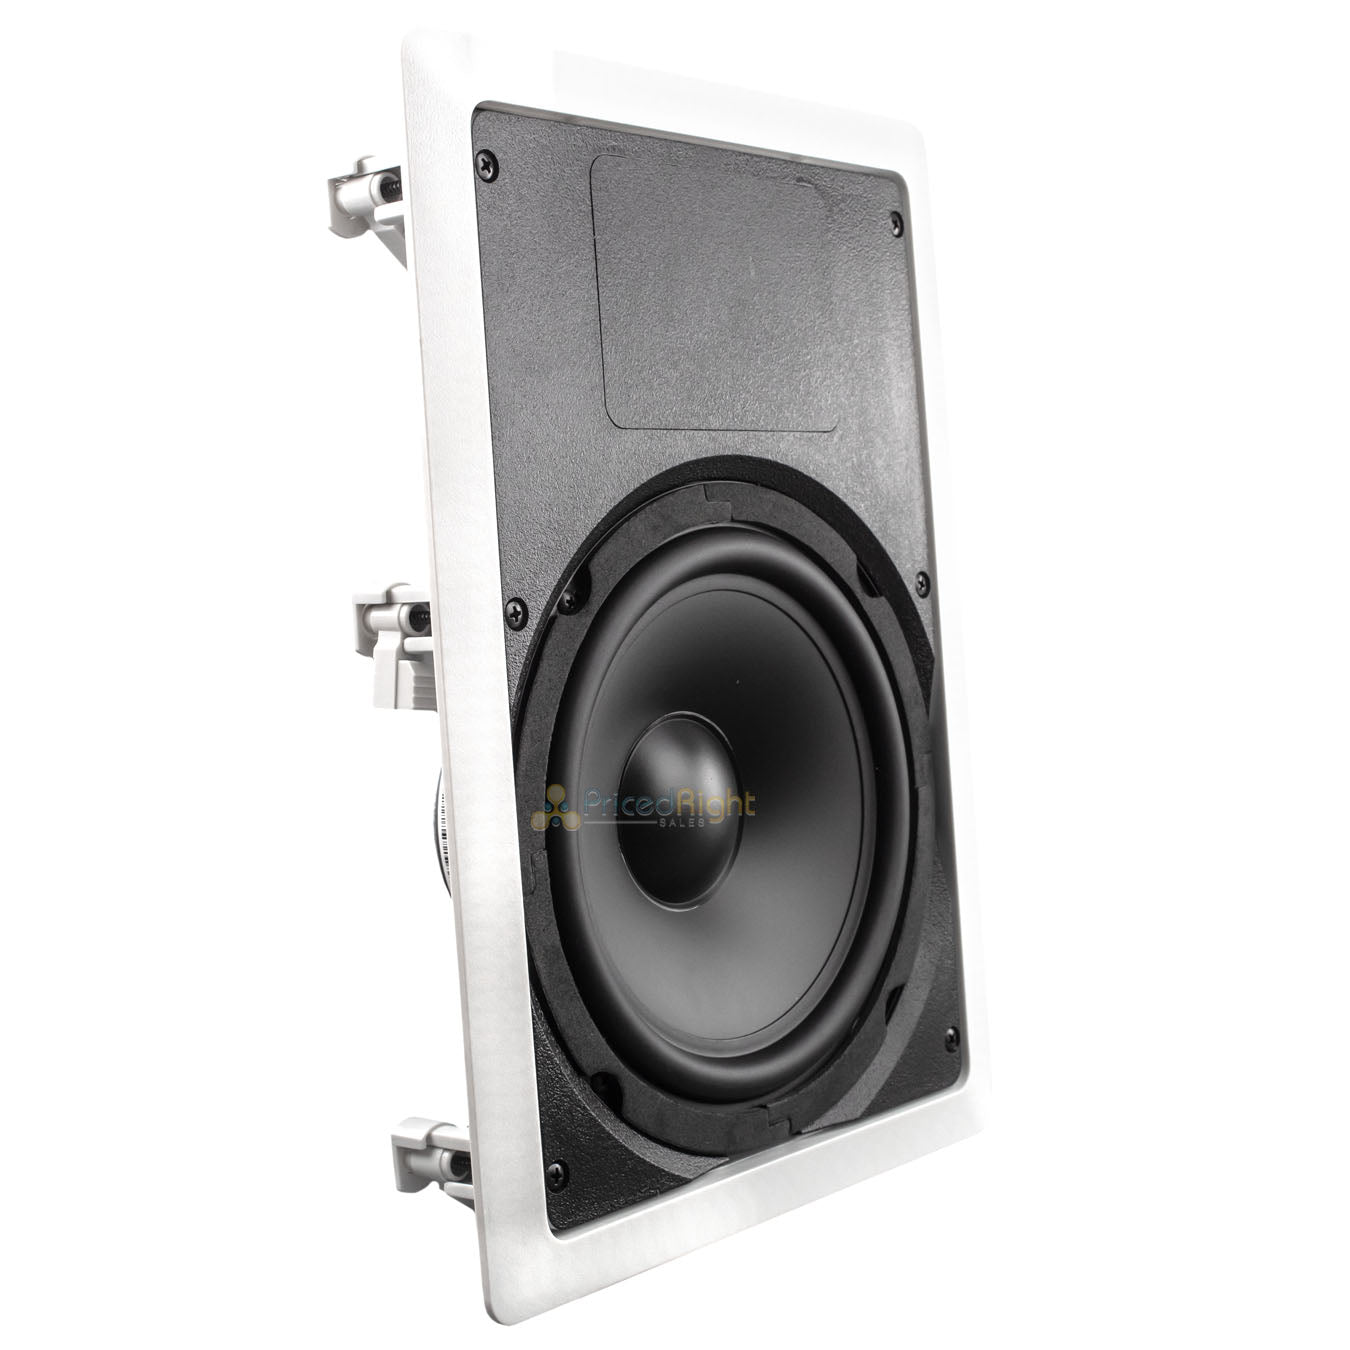 ﻿﻿8" In Wall Home Theater Subwoofer Speaker 100W 8 Ohm MTX Audio Flush Mount